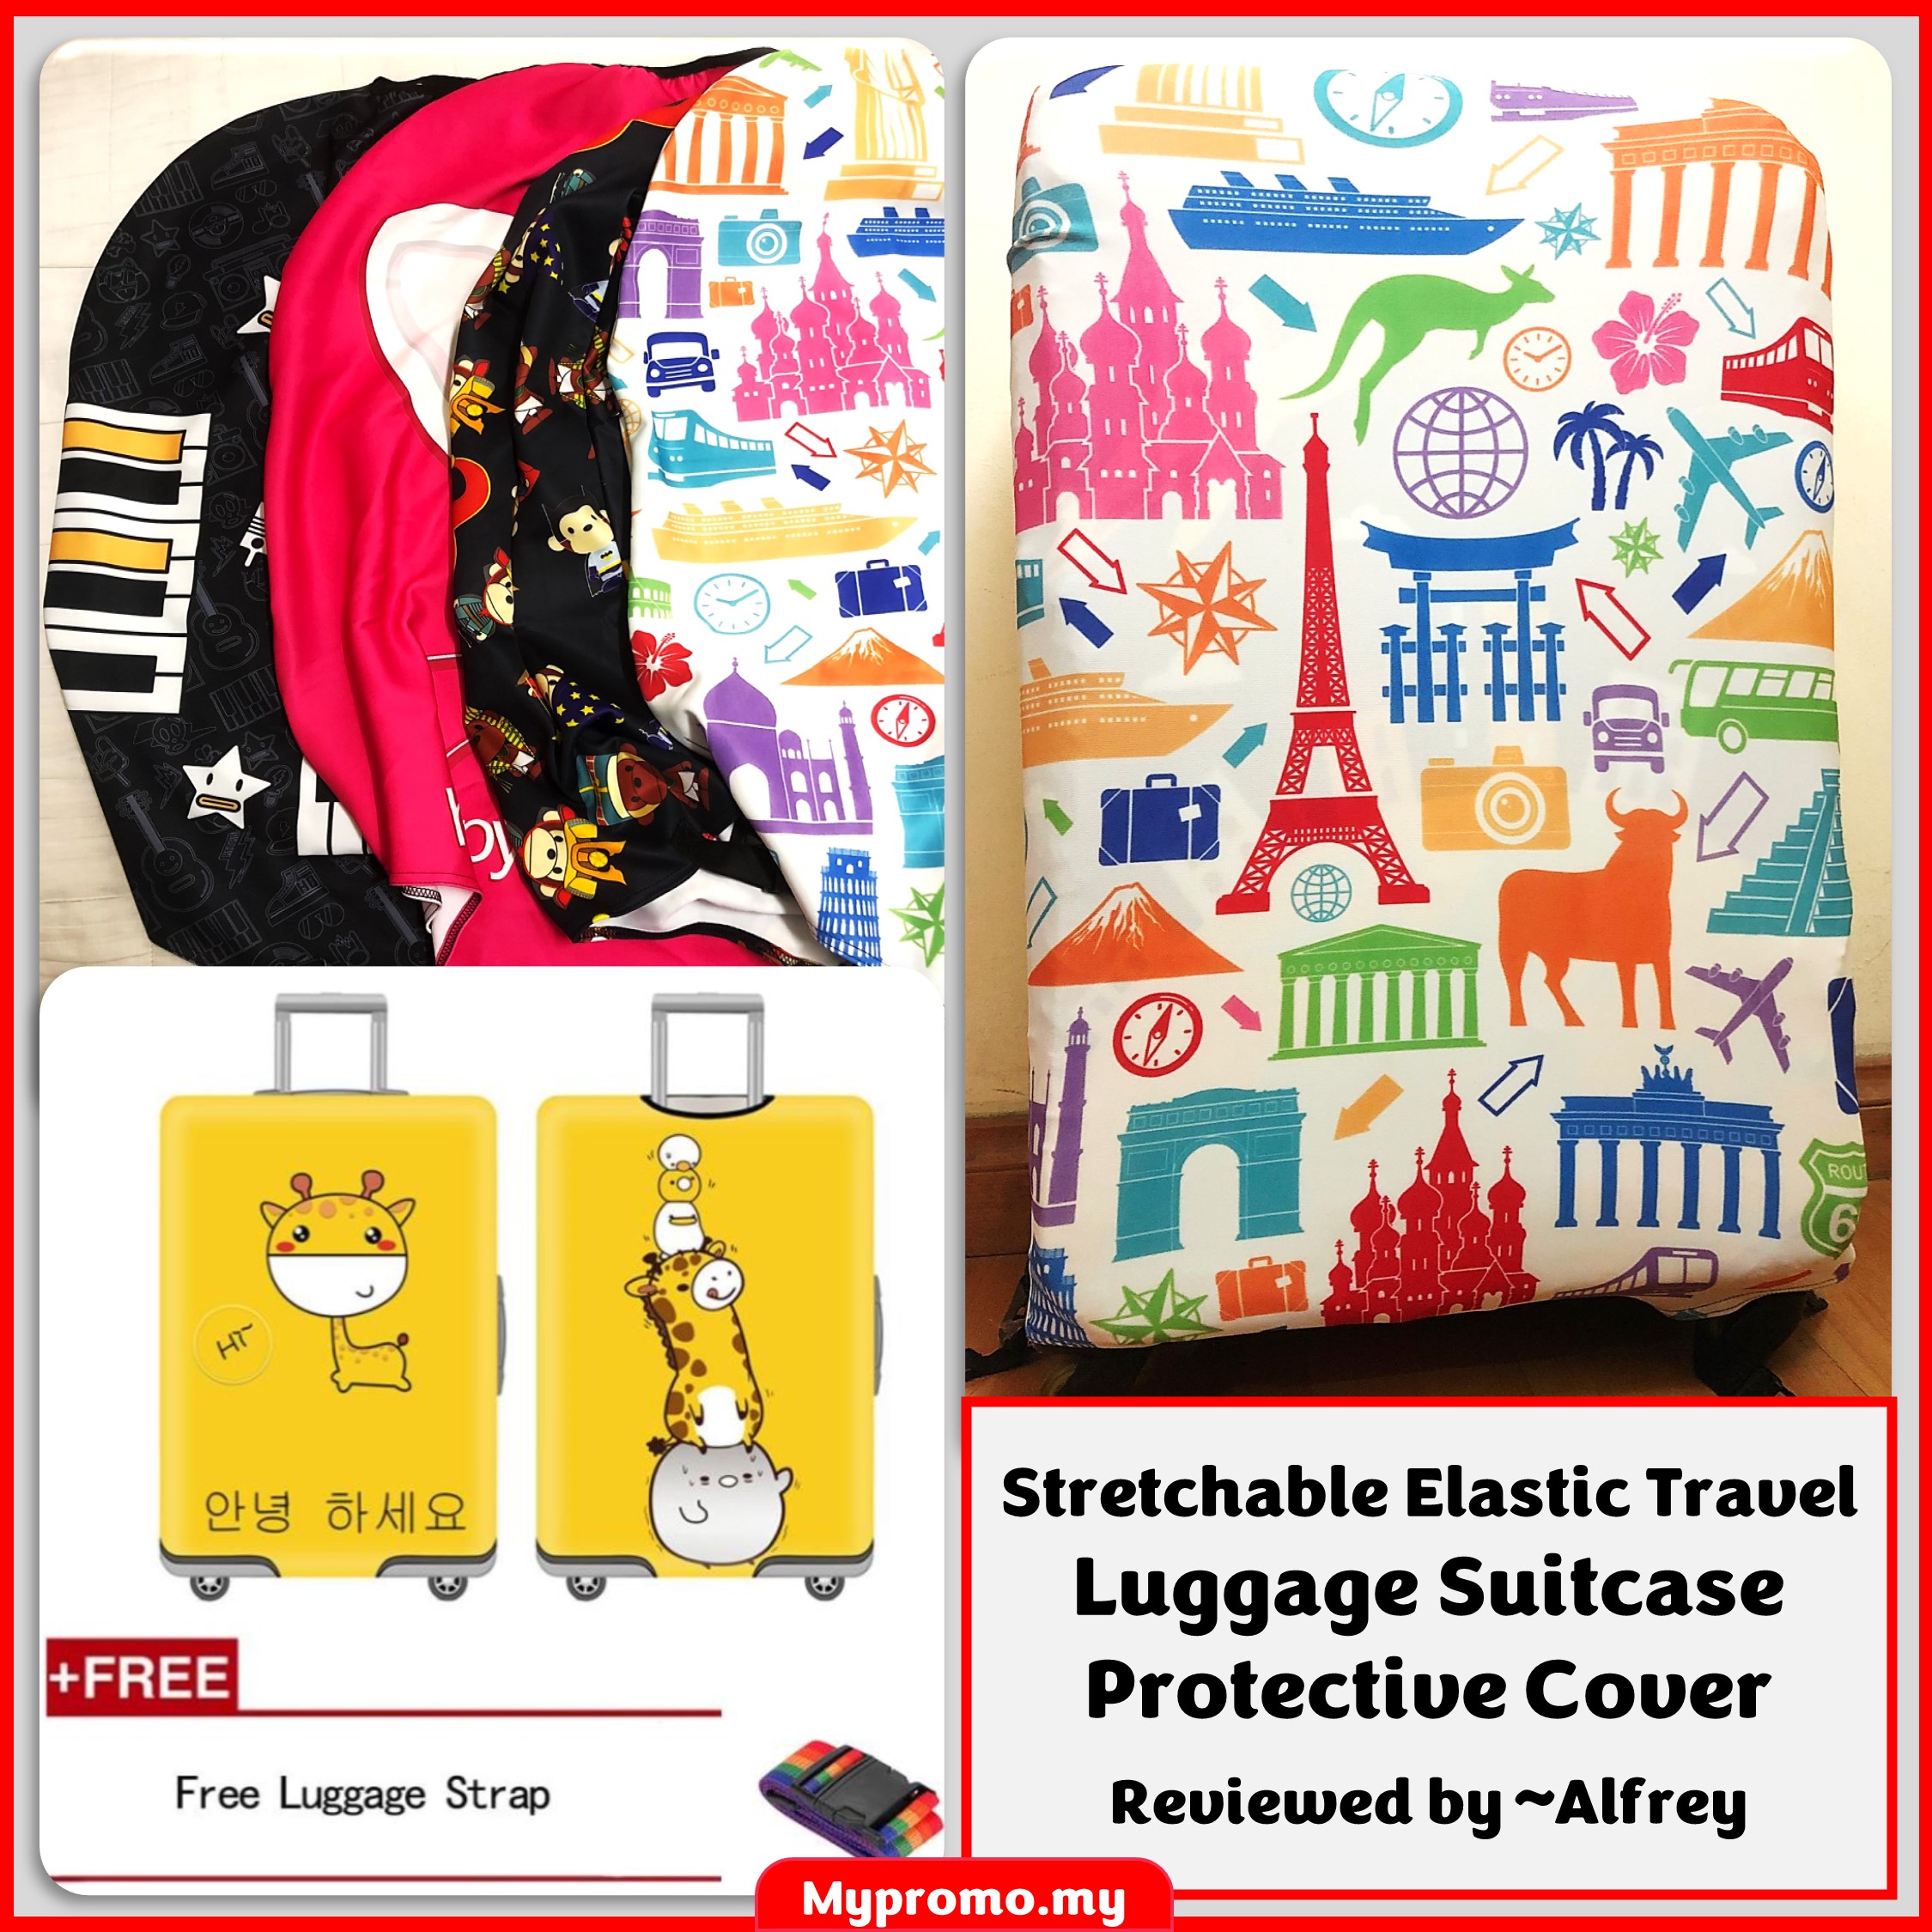 Product Review: Stretchable Elastic Travel Luggage Suitcase Protective Cover